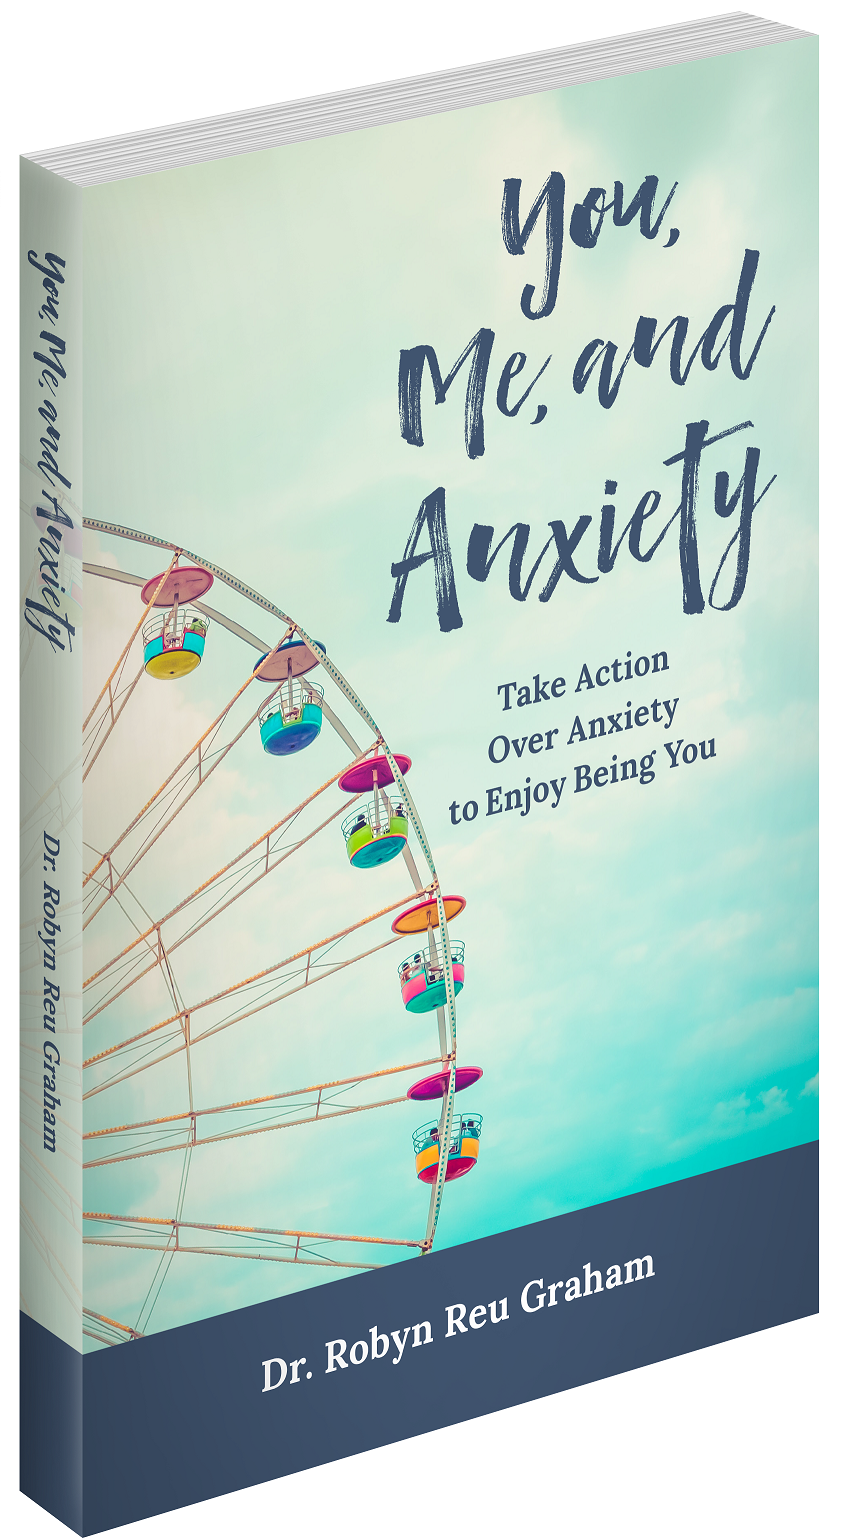 You, Me, and Anxiety: Take Action Over Anxiety to Enjoy Being You is available for purchase as both a paperback and digital book at Amazon and Barnes & Noble and as a digital book at Apple Books.